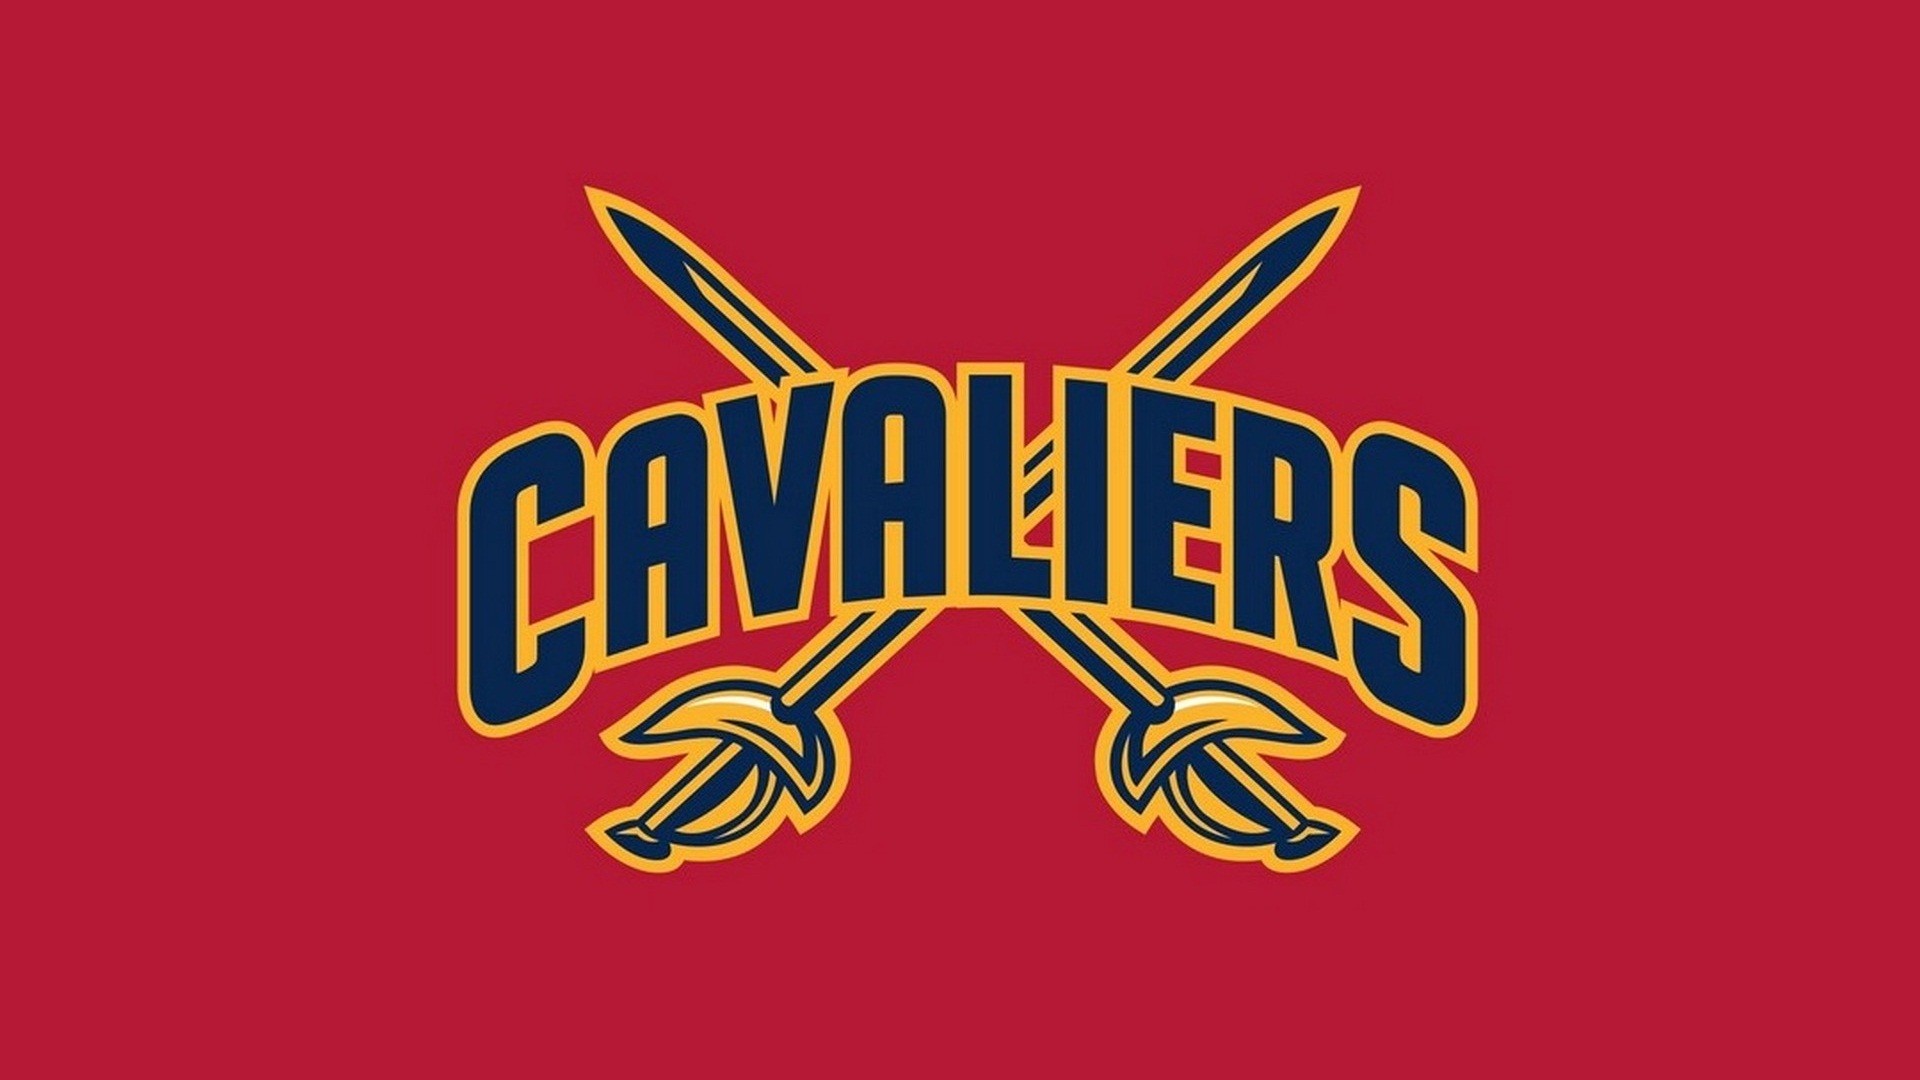 Cleveland Cavaliers Logo For Mac Wallpaper 1920x1080